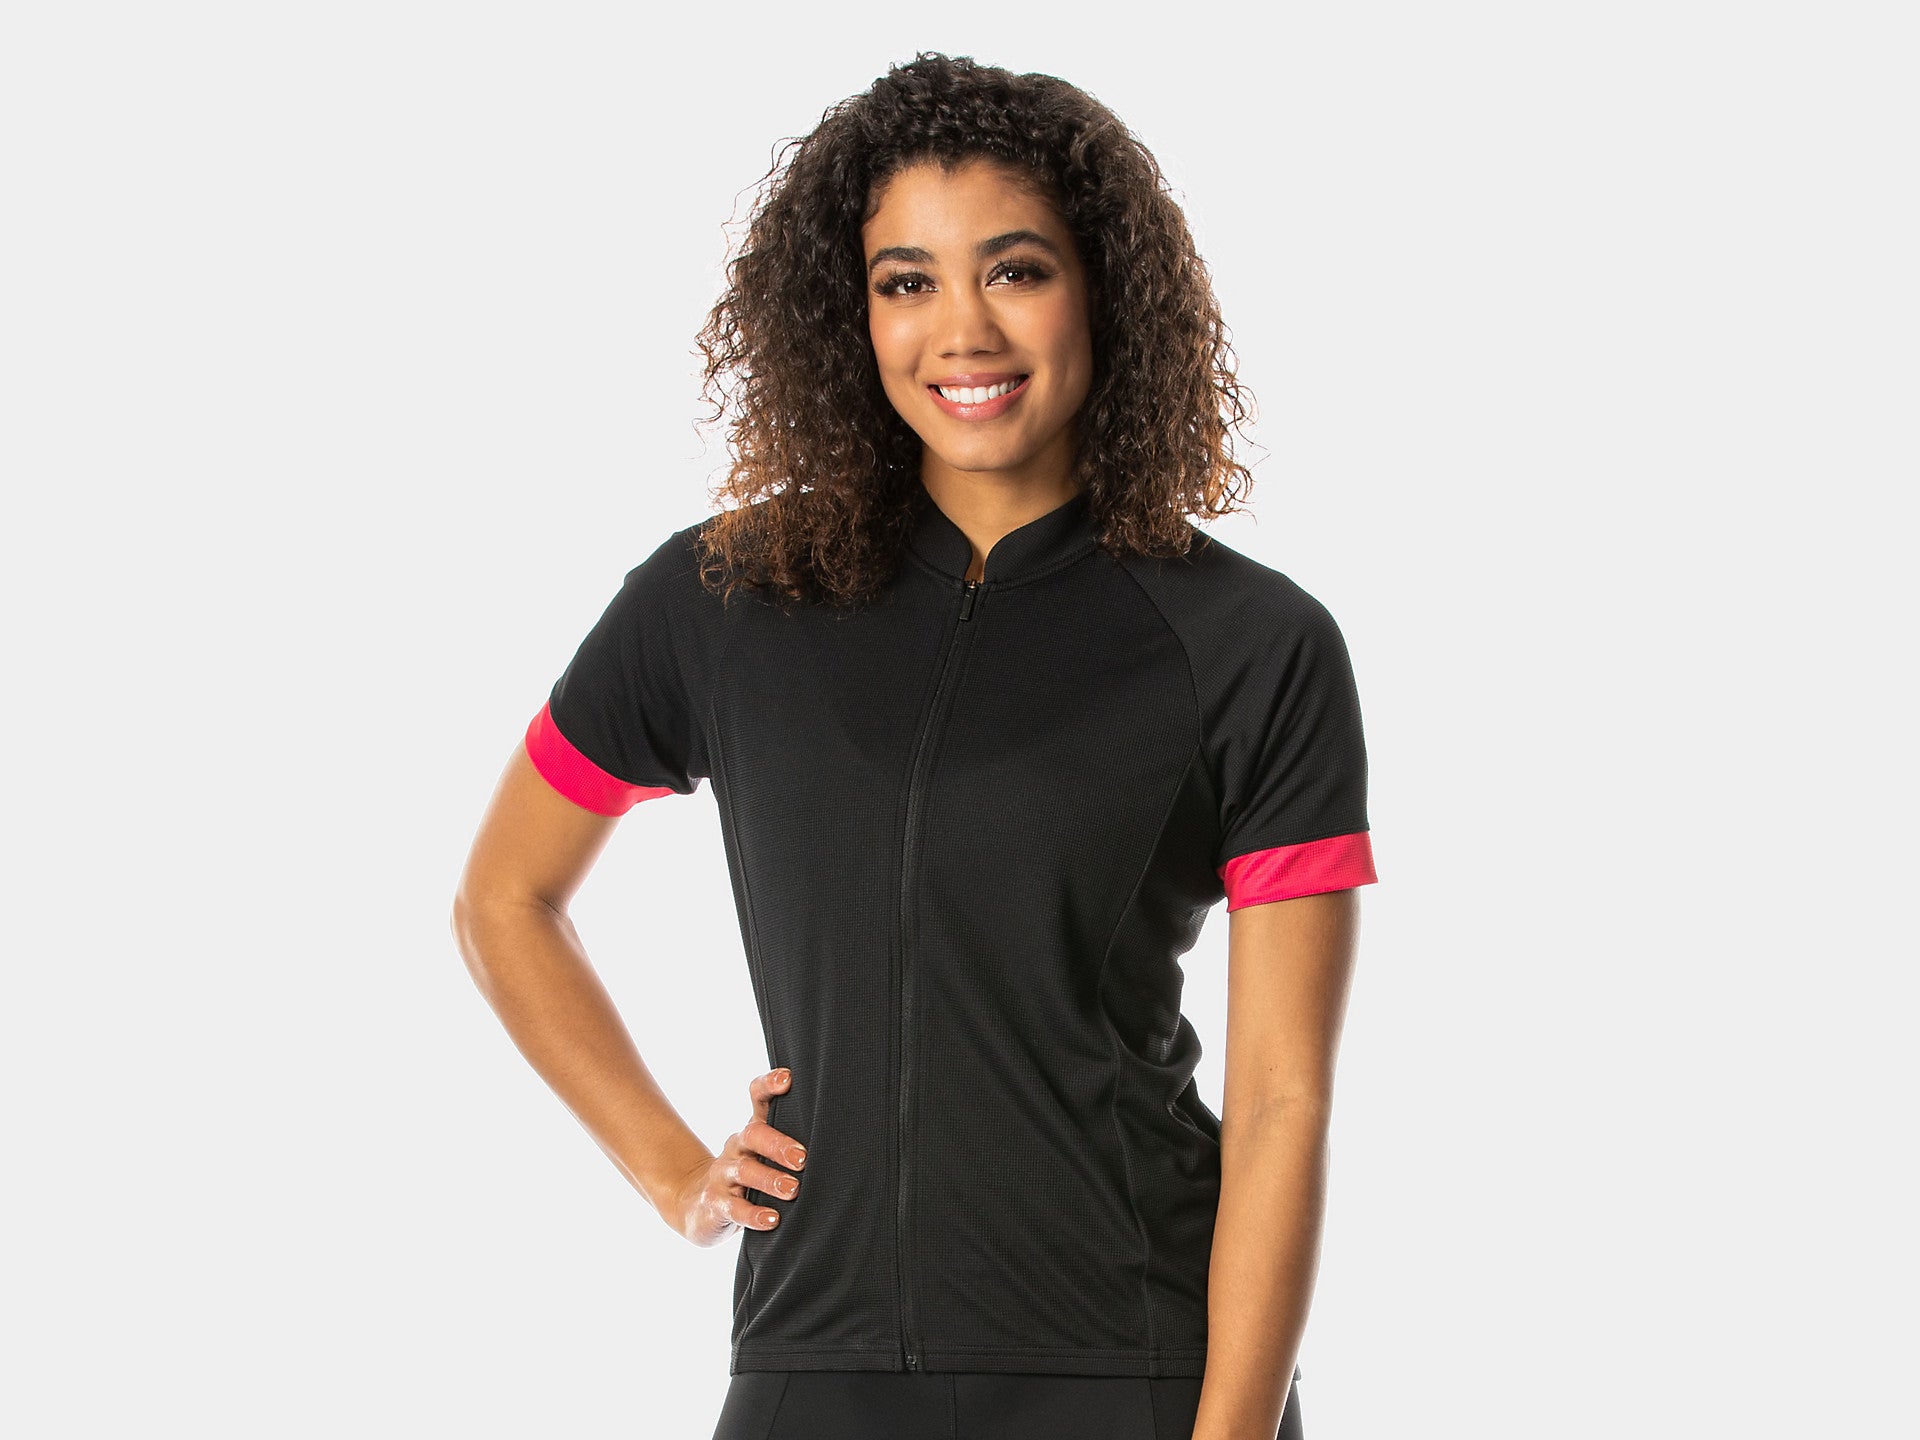 Bontrager Solstice Women's Cycling Jersey- Cycling Jersey- Women's Cycling Jersey- Women's Apparel